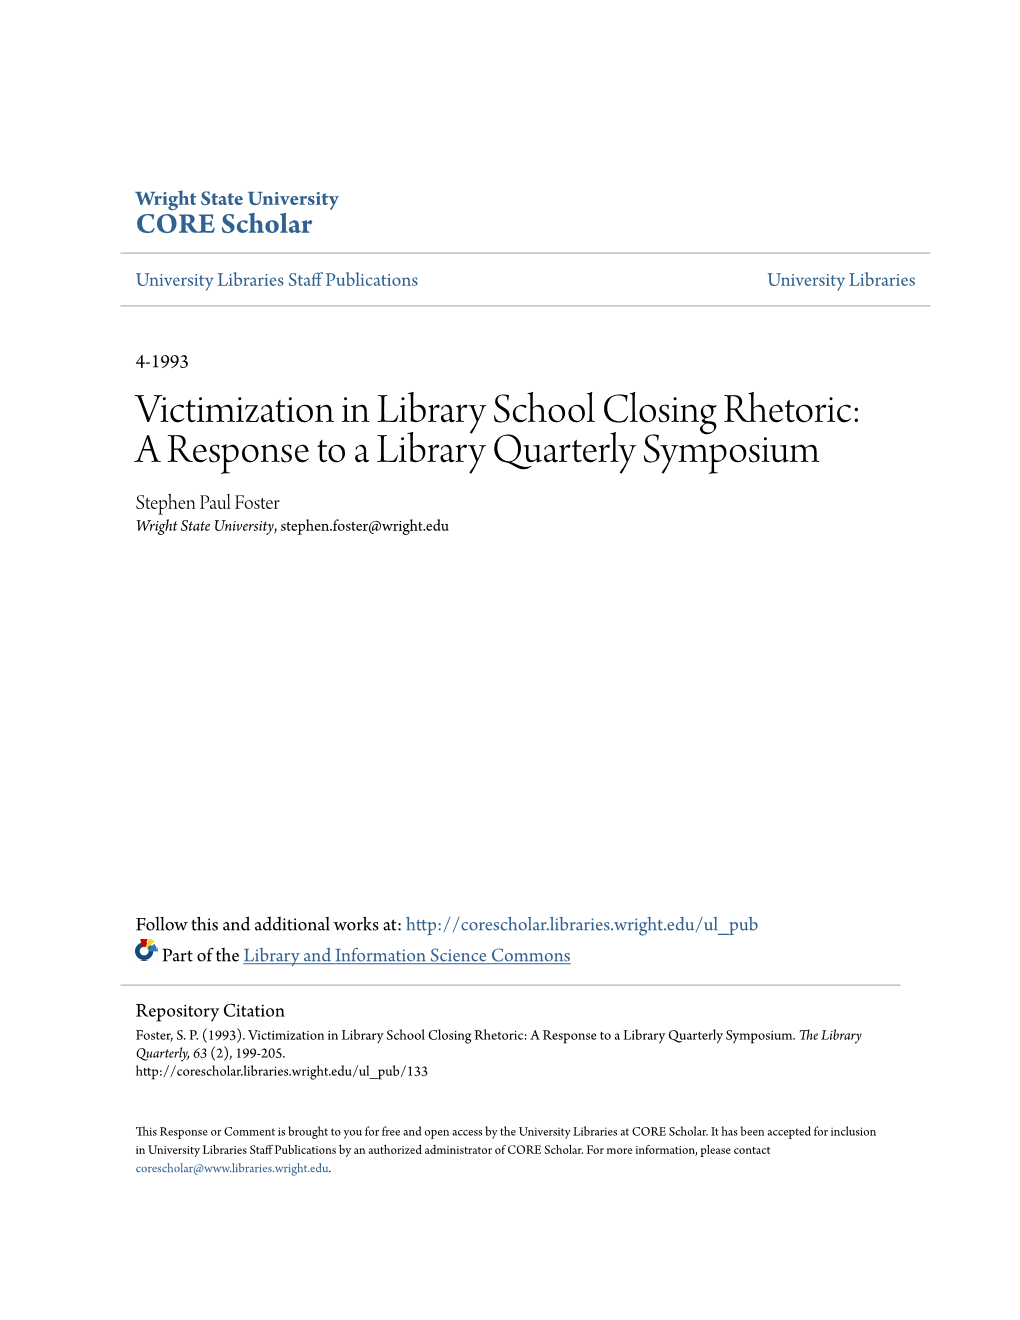 Victimization in Library School Closing Rhetoric: a Response to a Library Quarterly Symposium Stephen Paul Foster Wright State University, Stephen.Foster@Wright.Edu